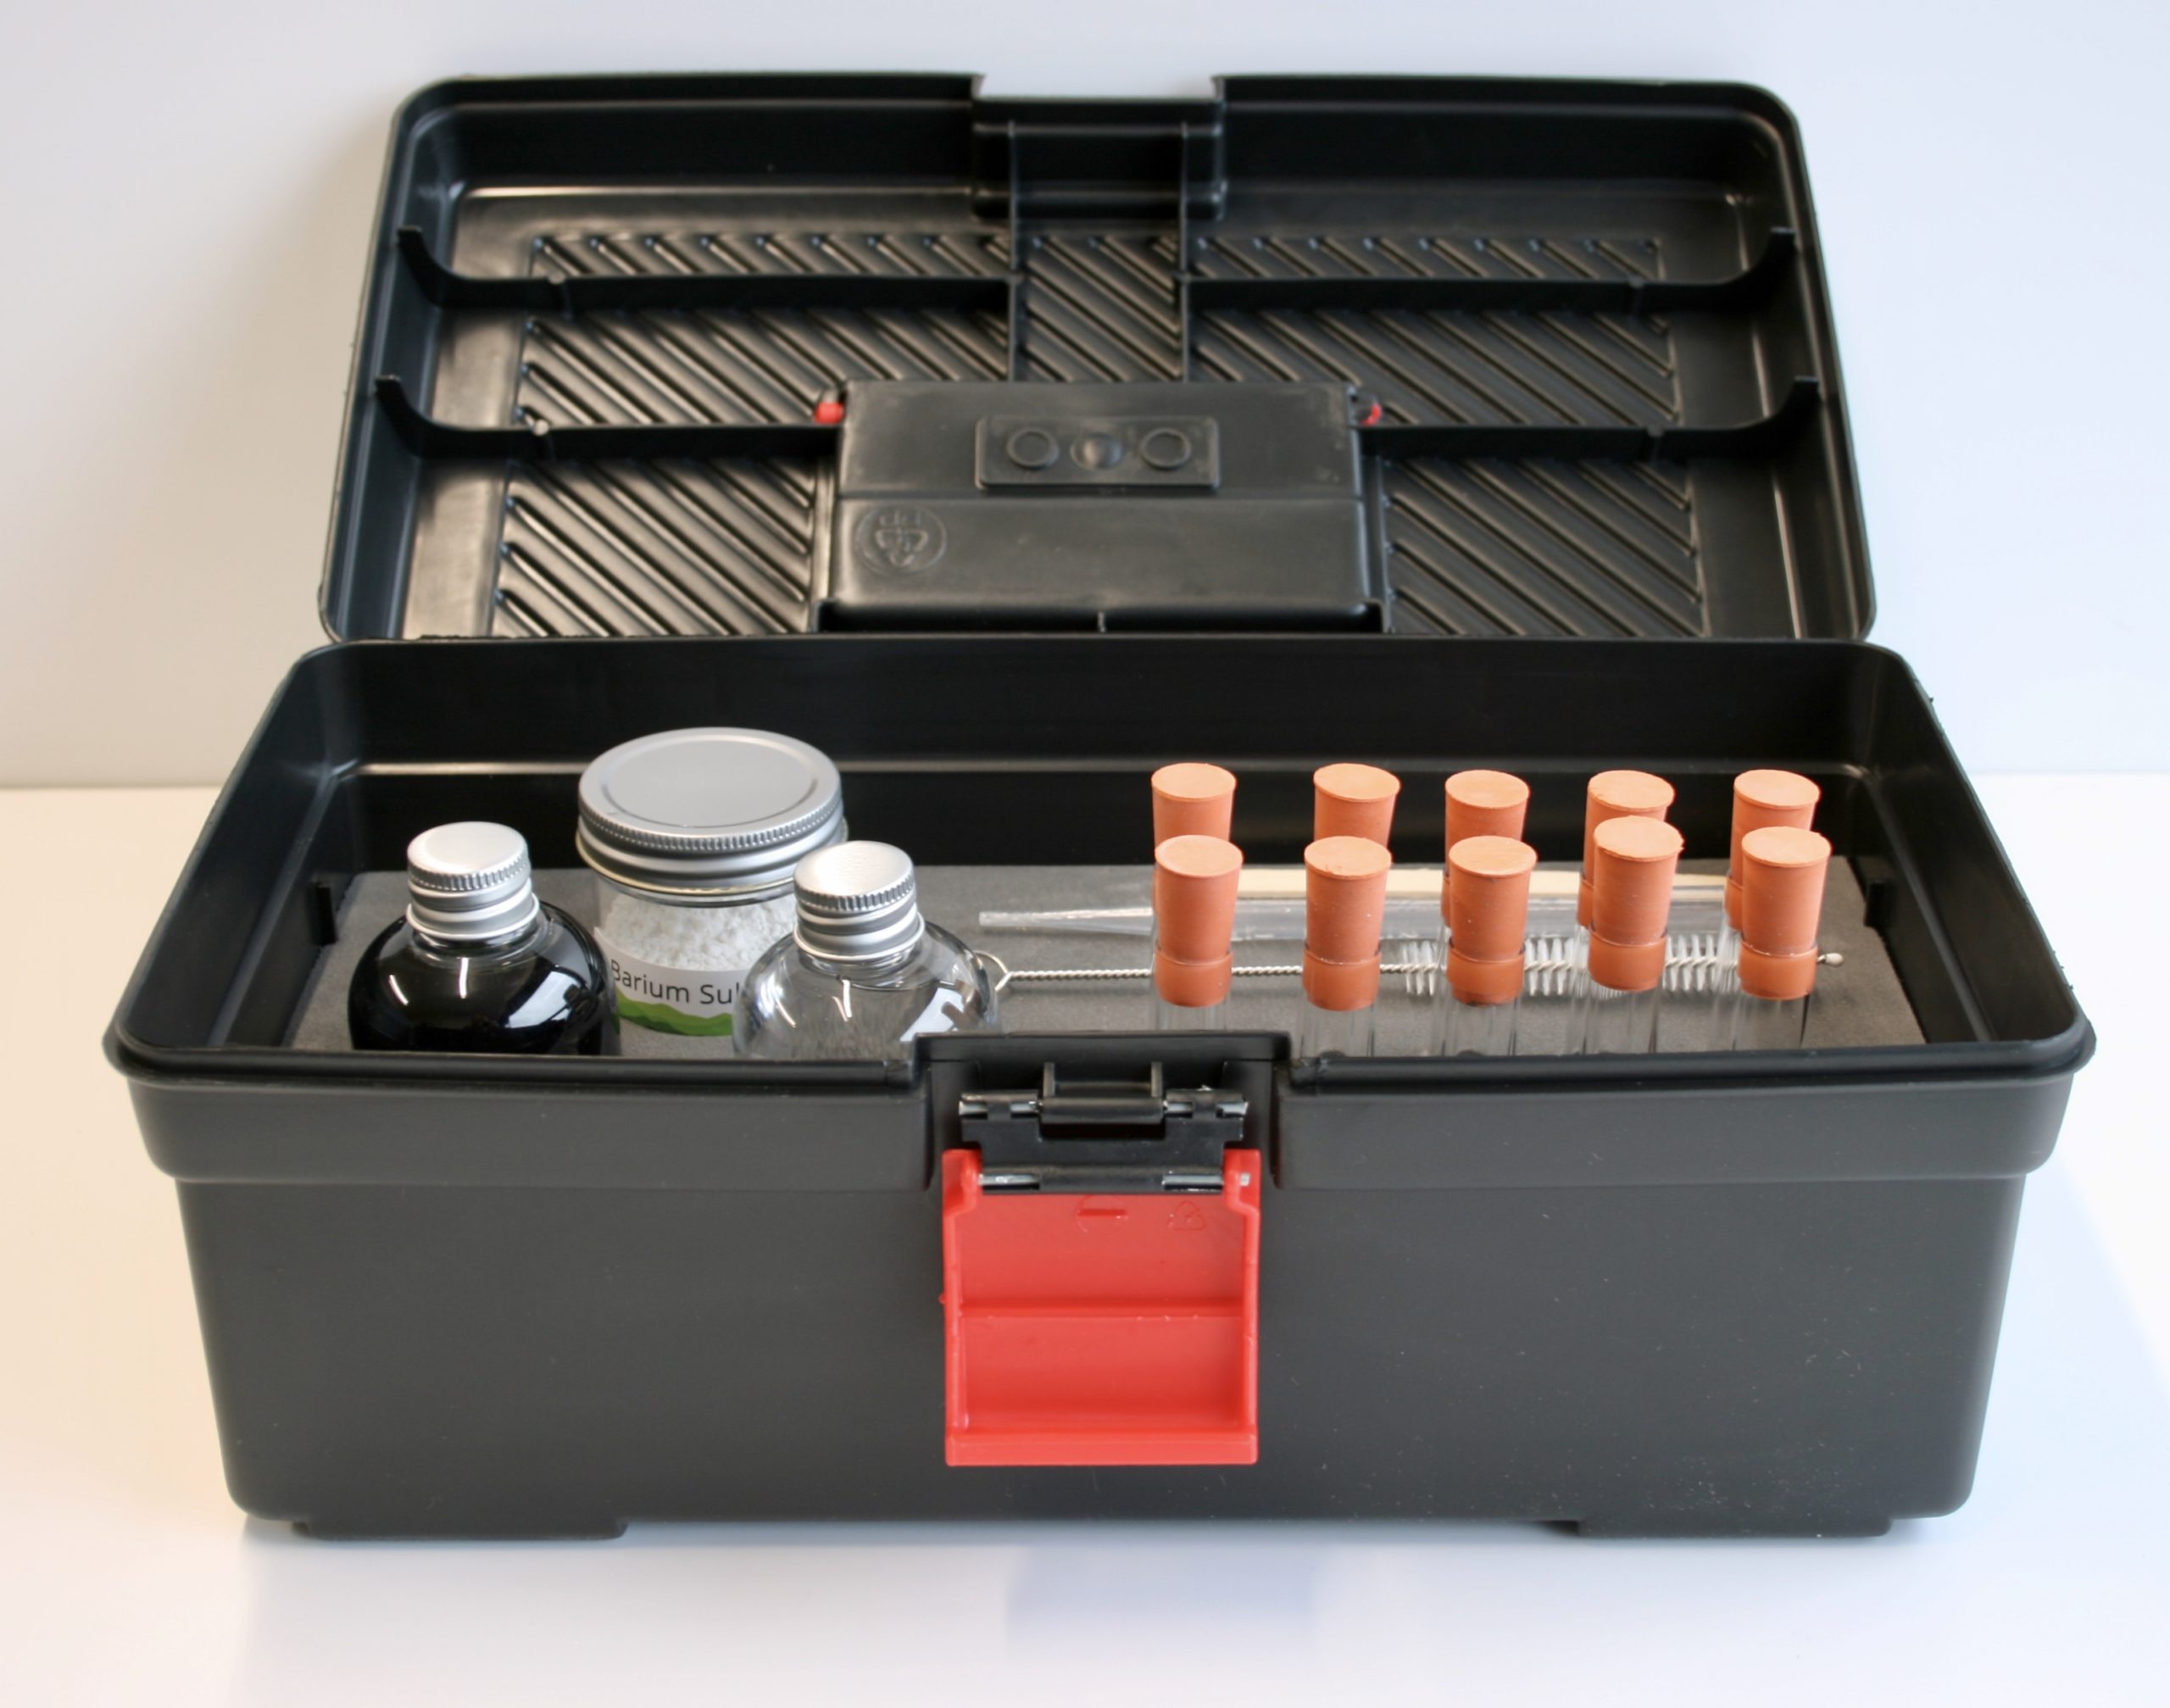 Soil Test Kit: How To Check The Quality And Condition Of Your Lawn